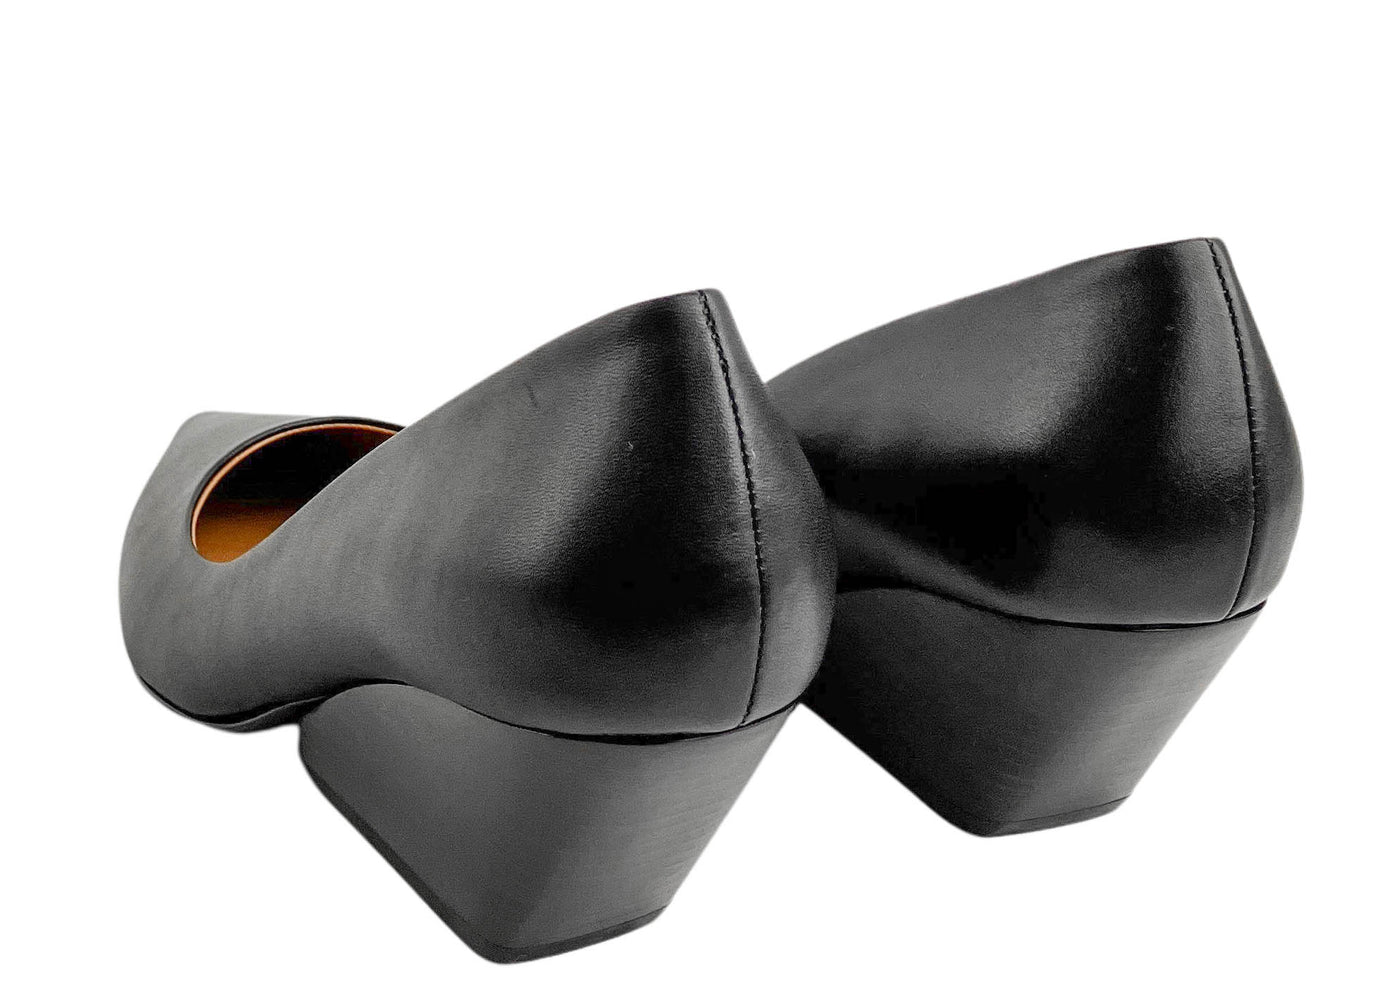 Marni Space Pointy Pumps in Black - Discounts on Marni at UAL